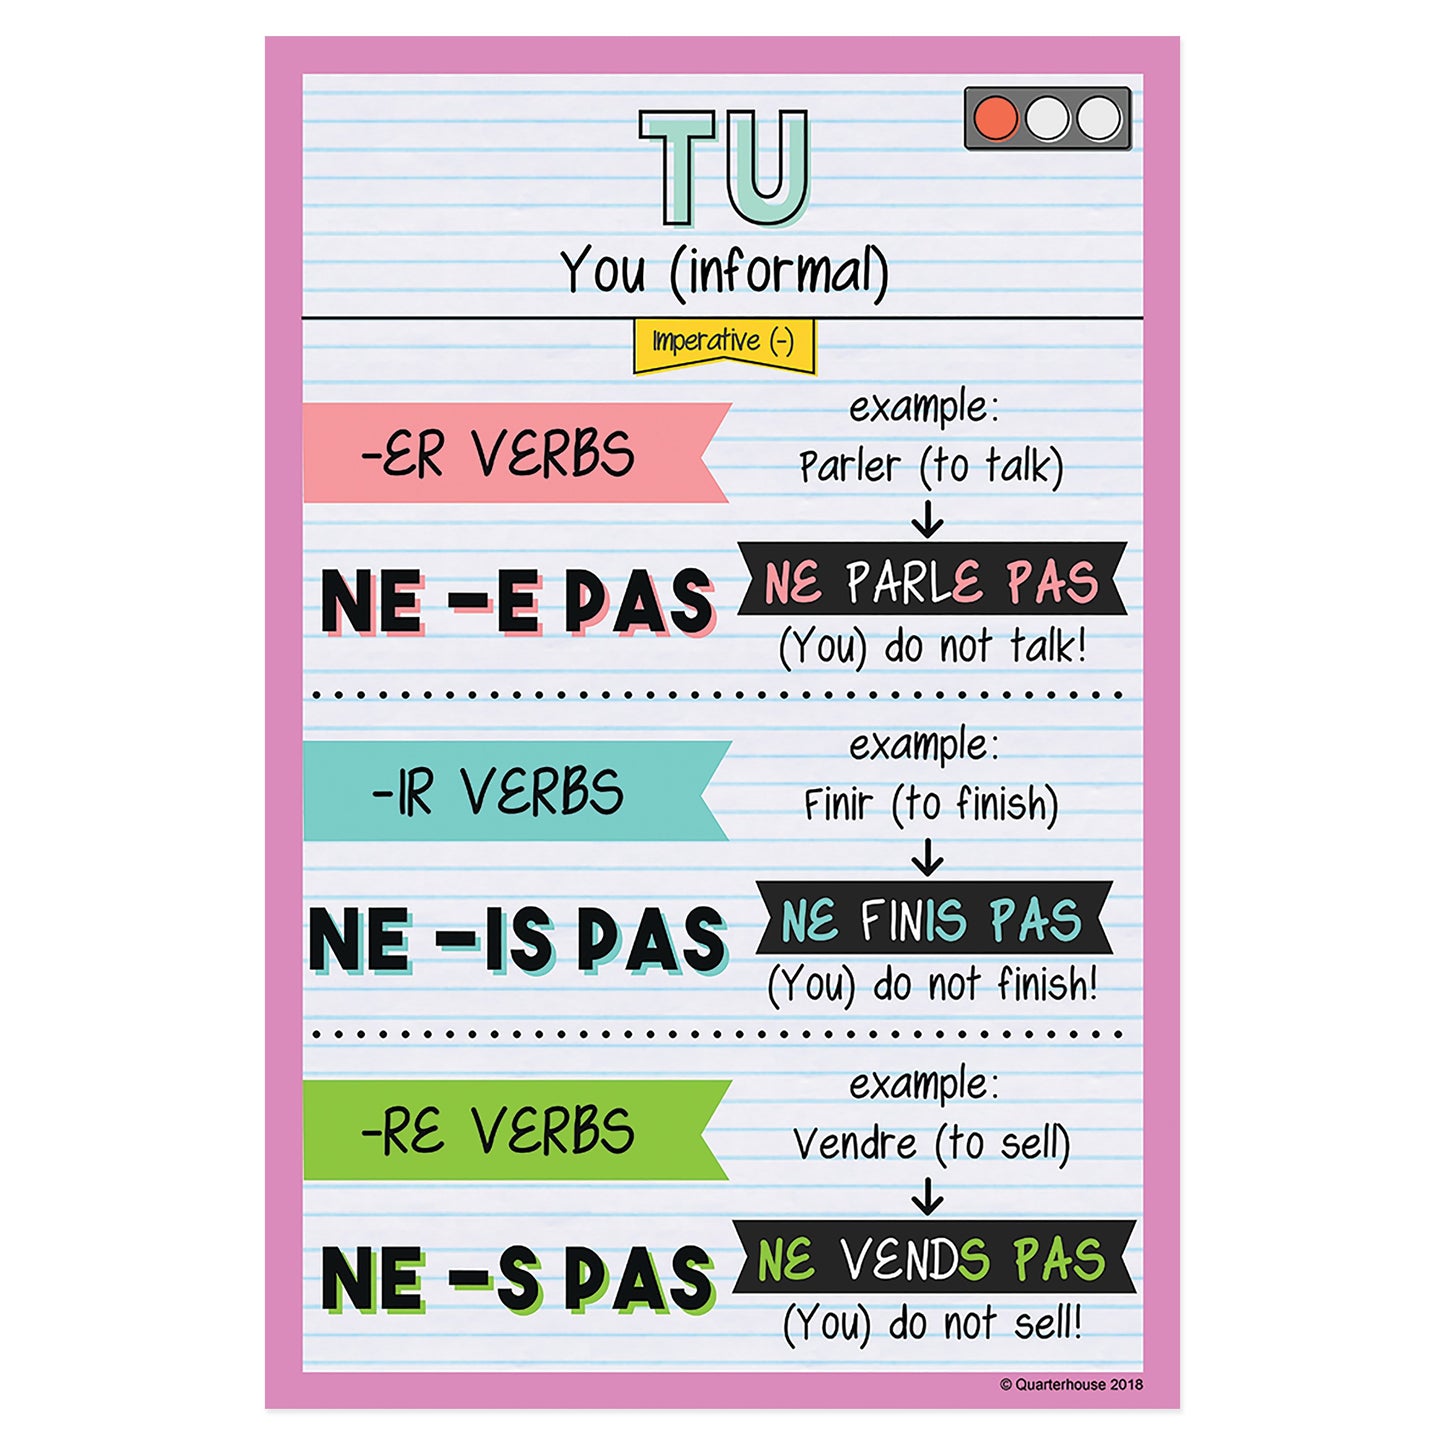 Quarterhouse Tu - Imperative (Negative) Tense French Verb Conjugation Poster, French and ESL Classroom Materials for Teachers